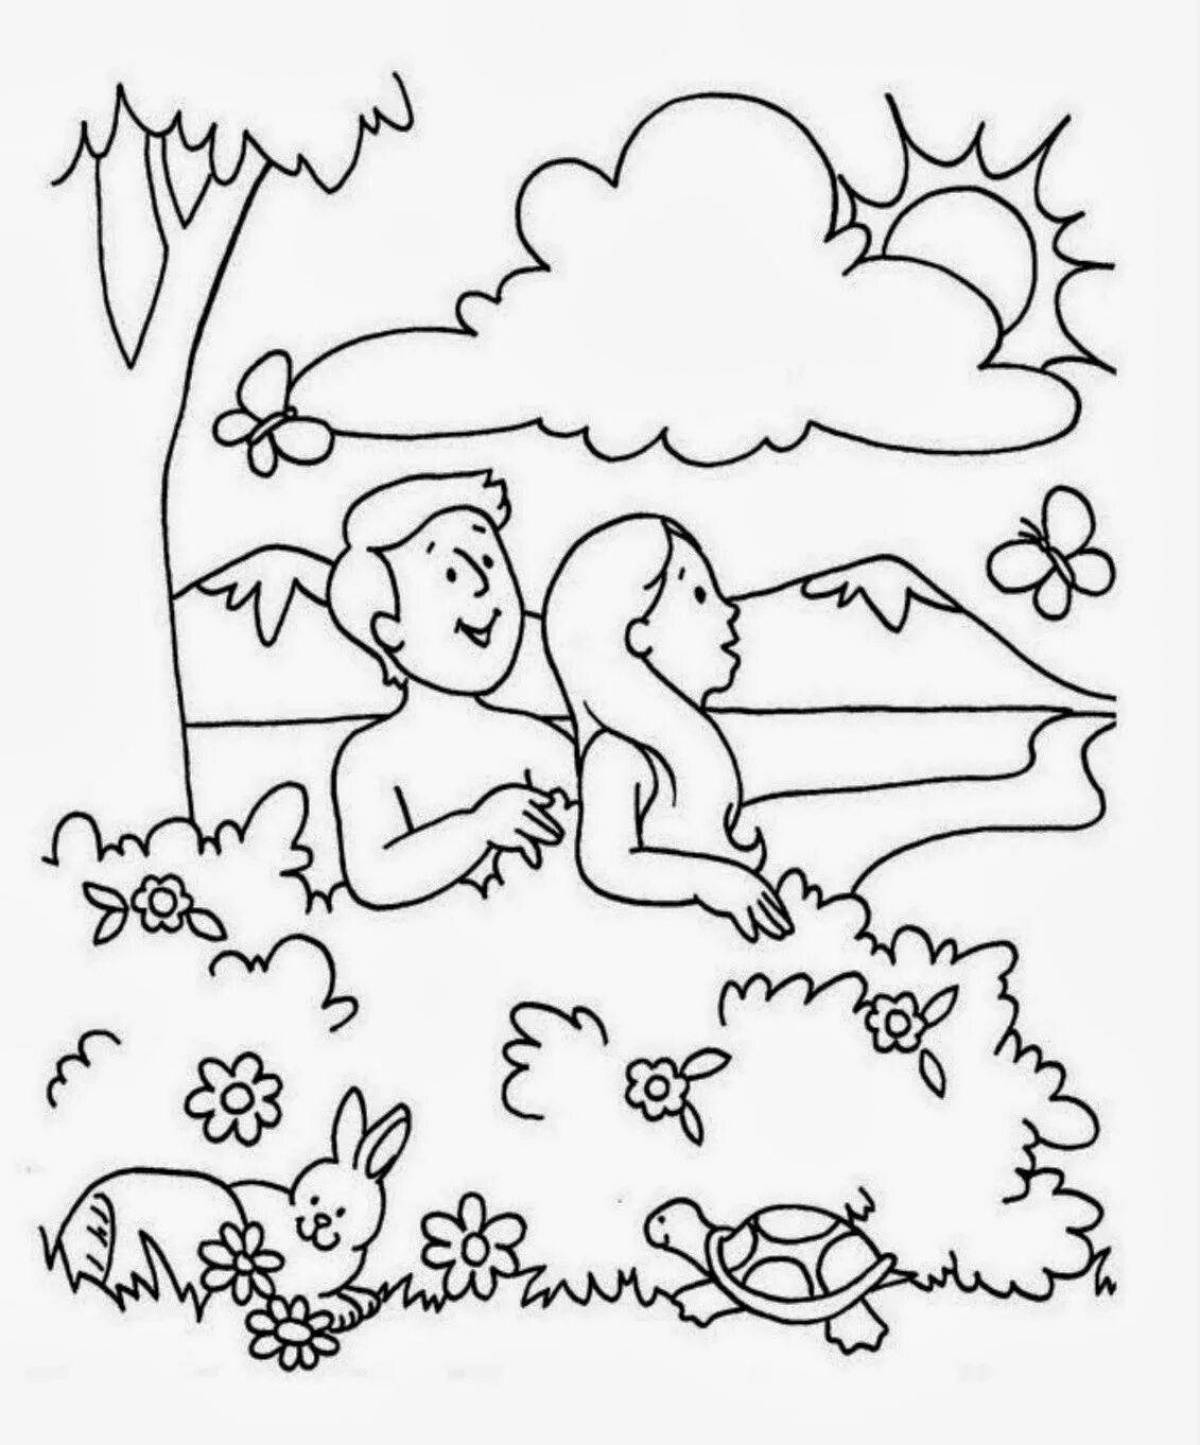 Shiny adam and eve coloring book